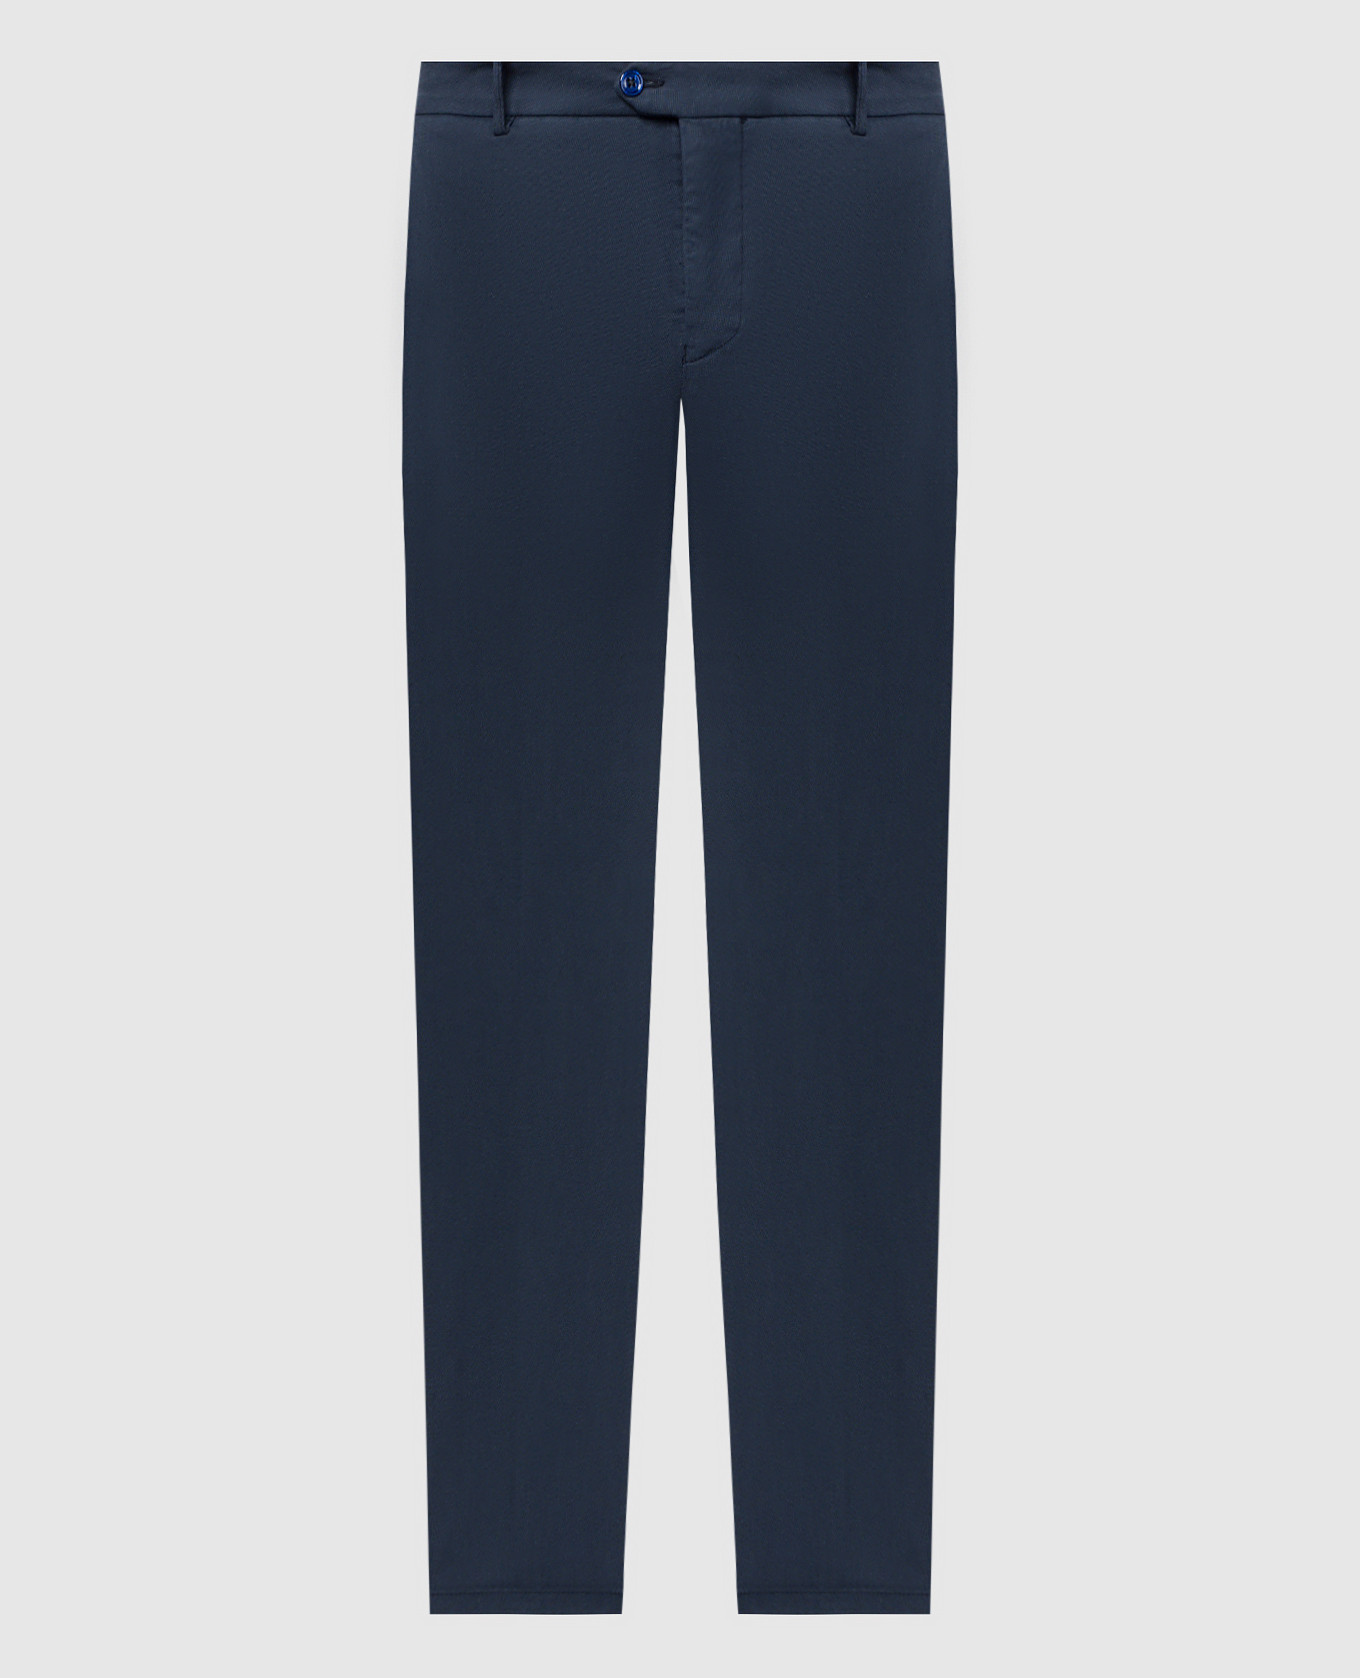 Blue EVO pants with silk and cashmere